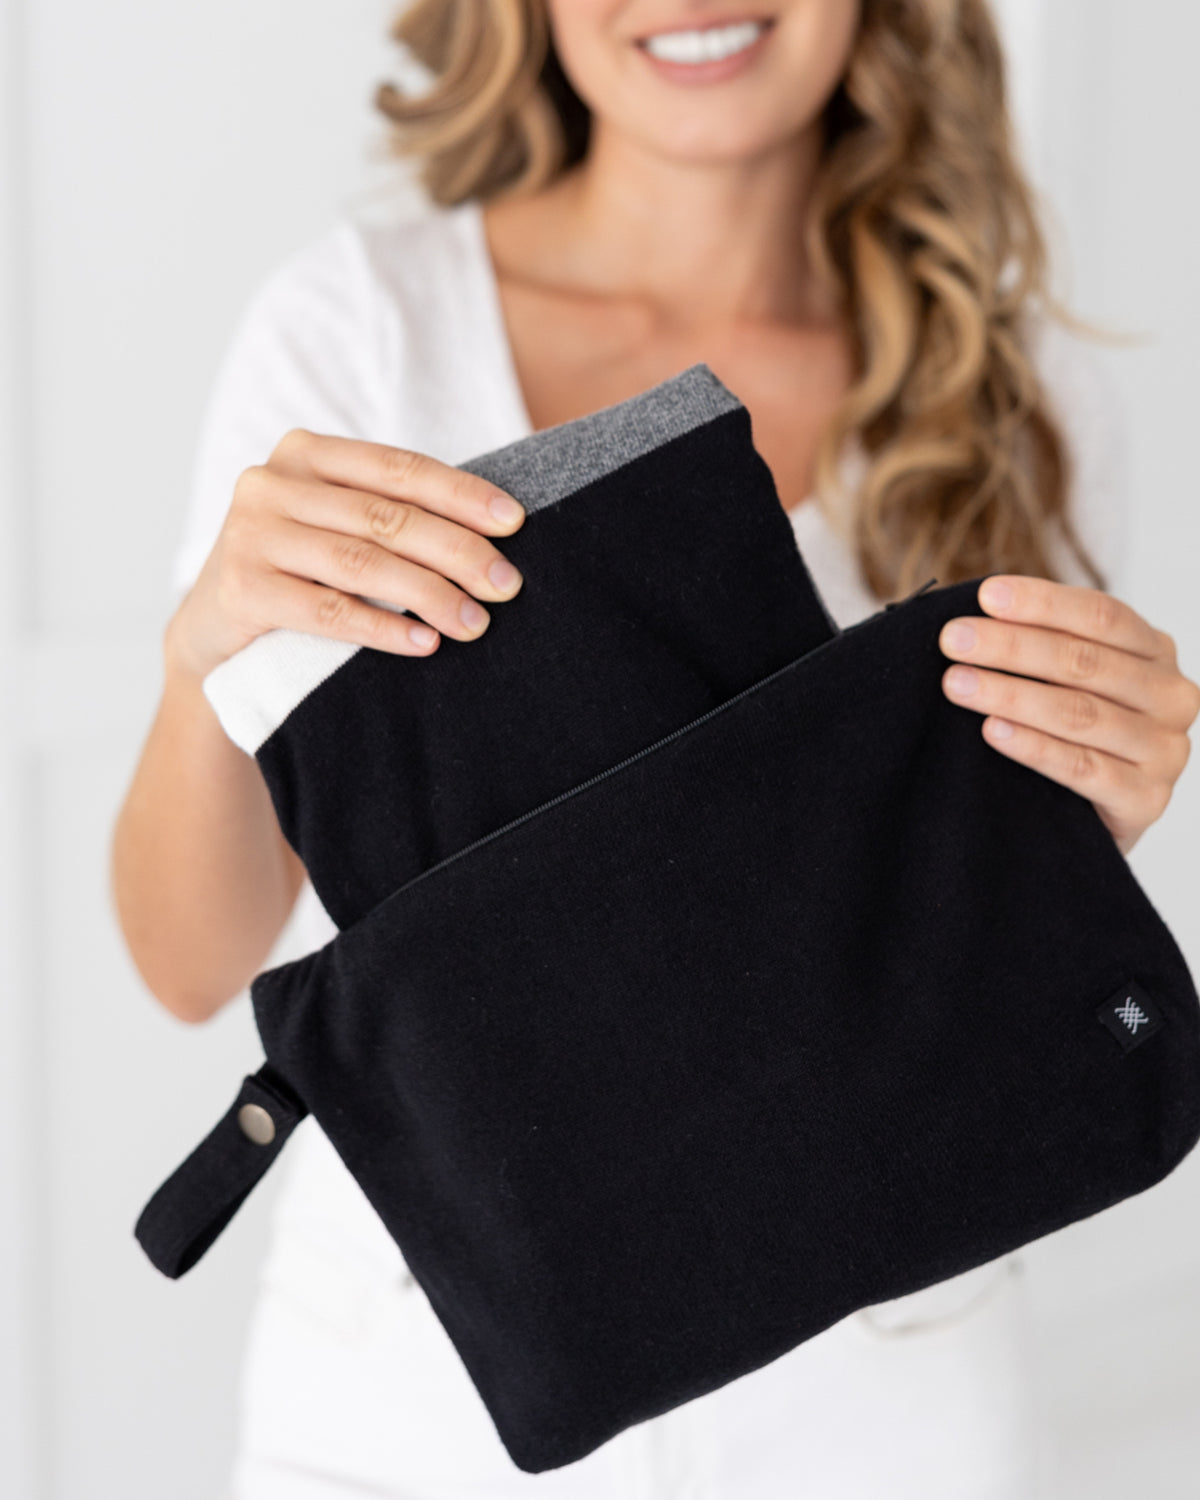 Woman holding Black Carry Pouch,  that can hold the Dreamsoft Travel Scarf, Gray Colorblock Dreamsoft Travel Scarf being shown taken out of the carry pouch.